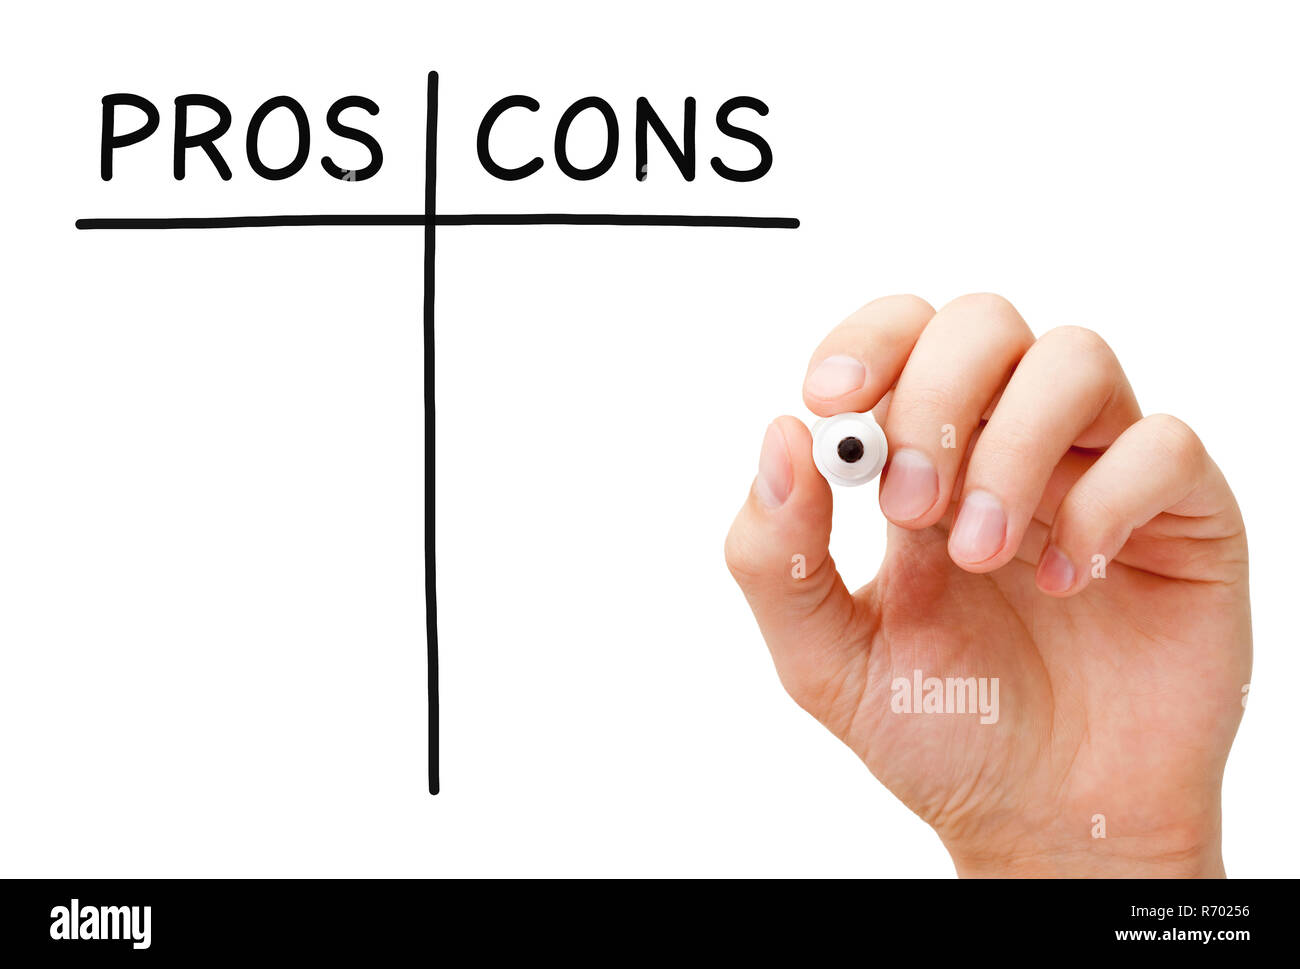 blank pros and cons chart